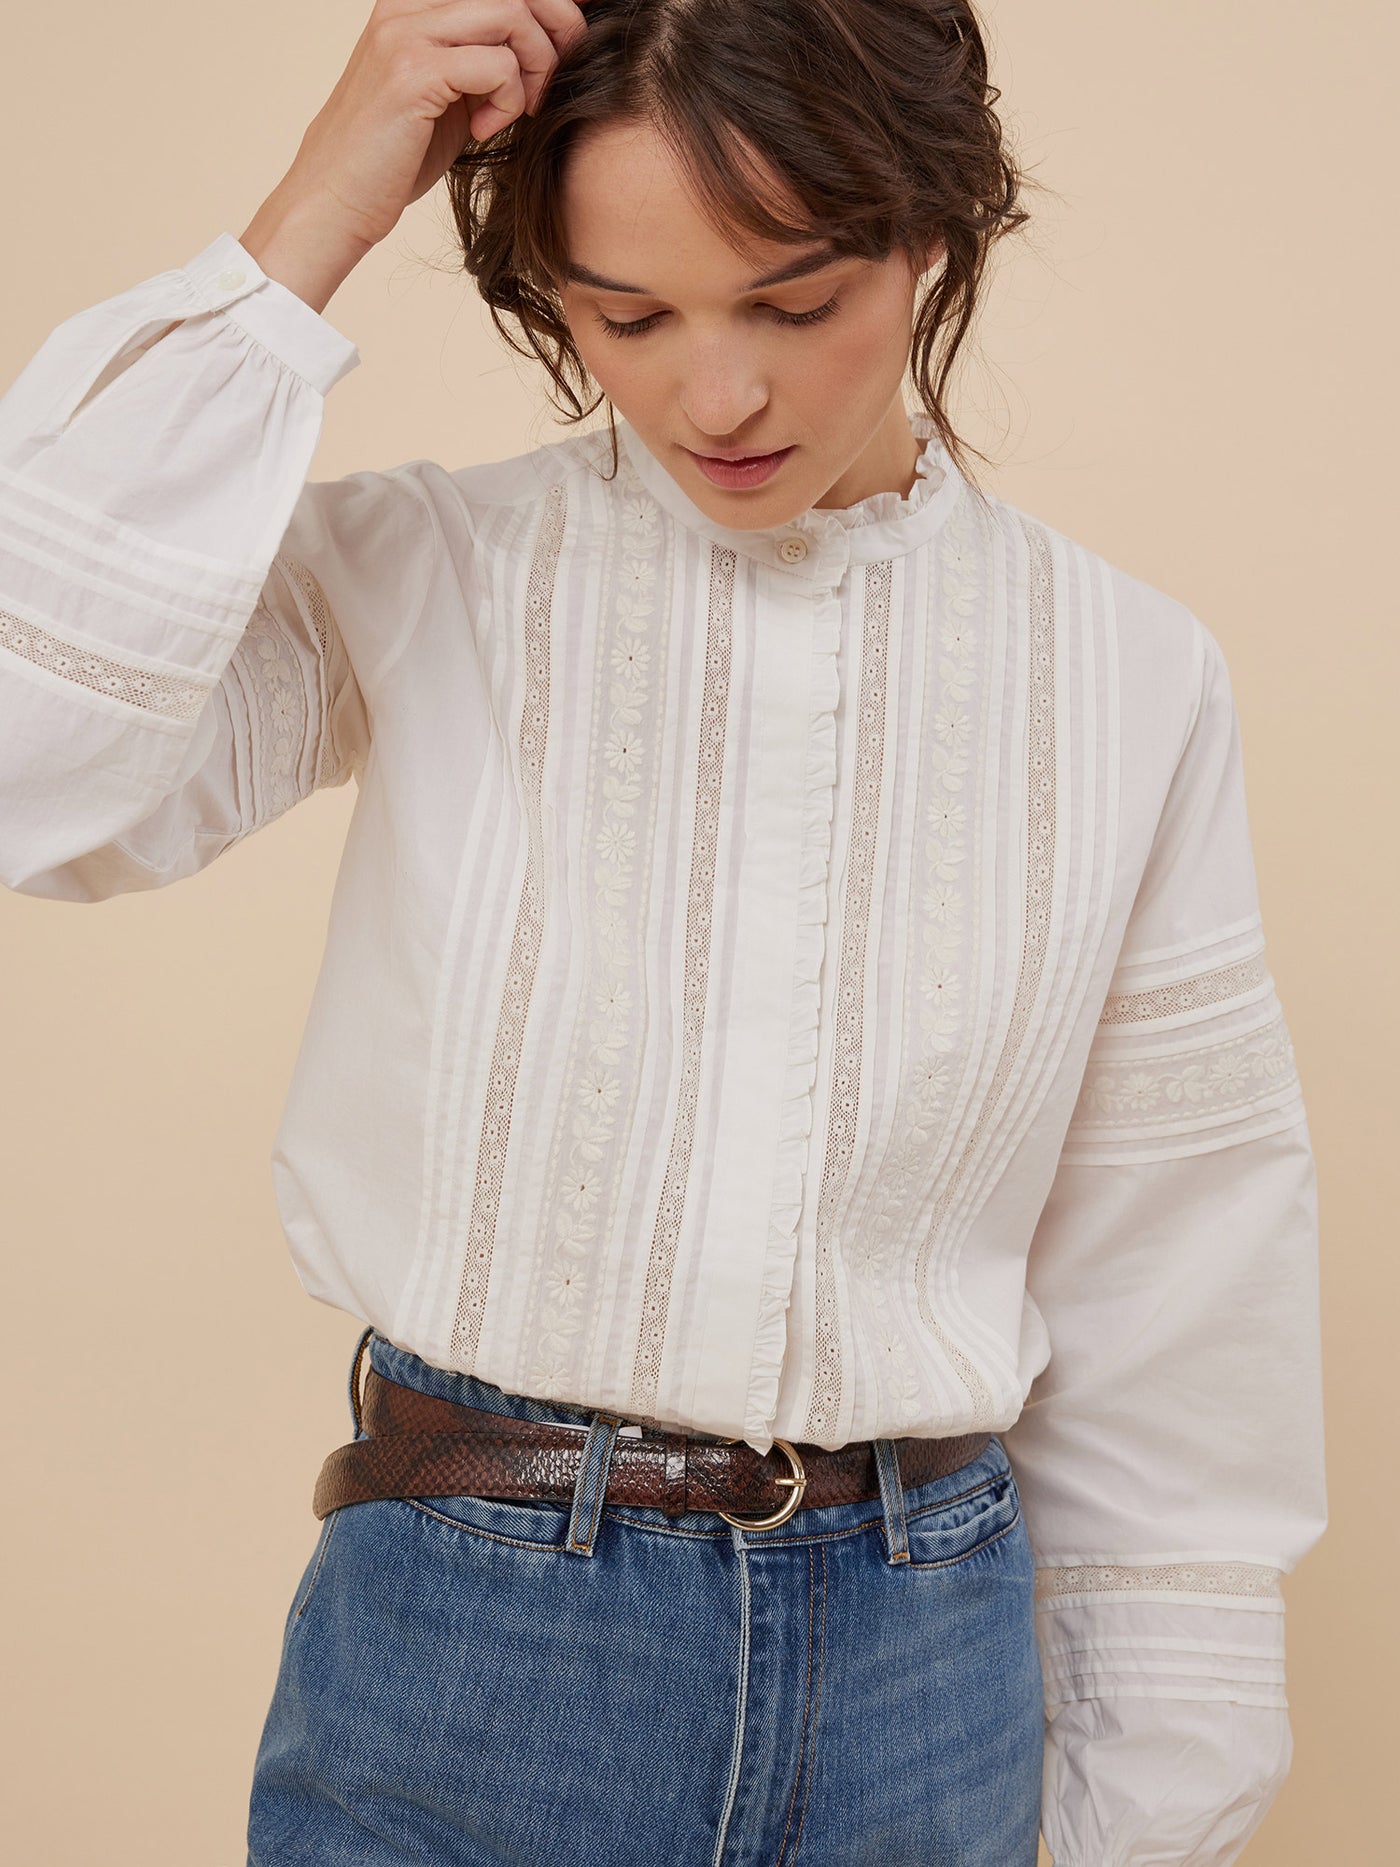 White cotton blouse with inlaid lace